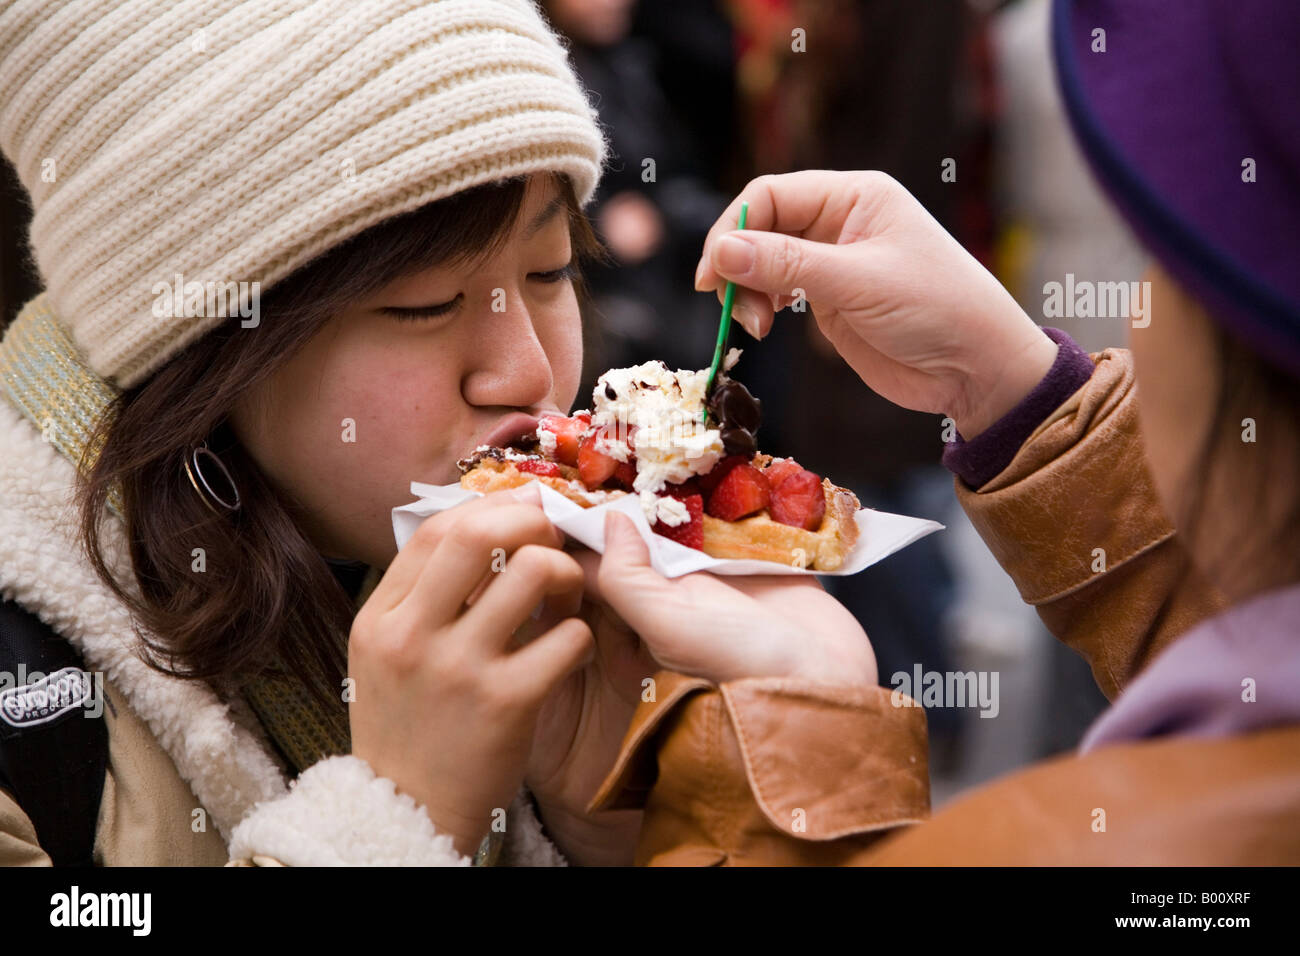 Japanese woman tourist being fed a Belgian waffle with strawberries and whipped cream, in Brussels, Belgium. Stock Photo